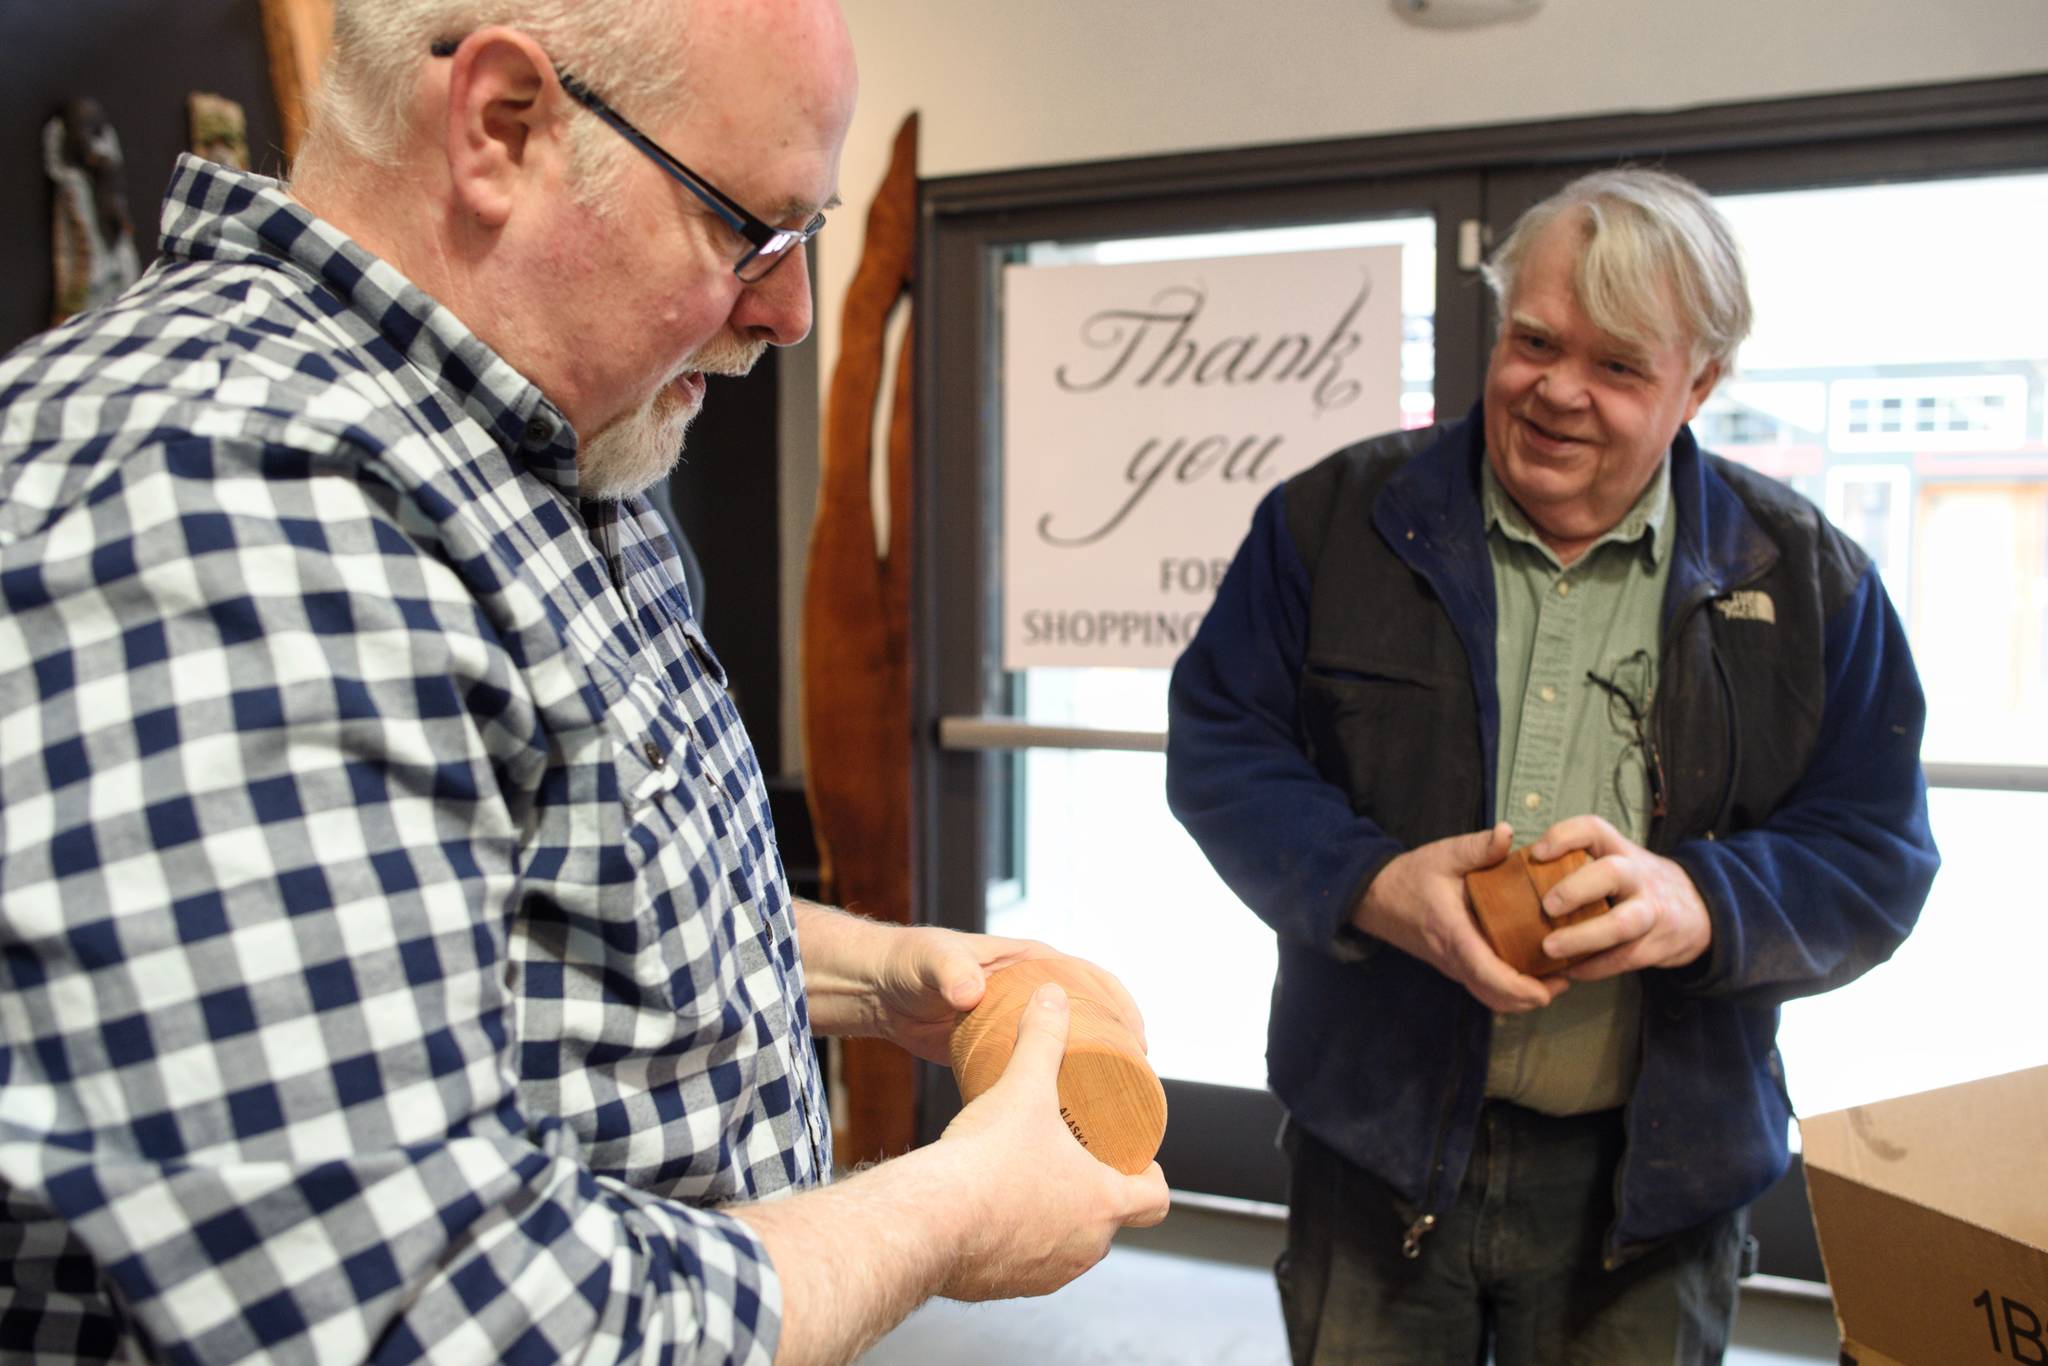 Dean Graber, owner of Rainforest Custom, left, talks with Ed Hansen on Thursday, April 25, 2019, about Hansen’s wooden toys and boxes that will be for sale at Graber’s new shop on South Franklin Street. (Michael Penn | Juneau Empire)